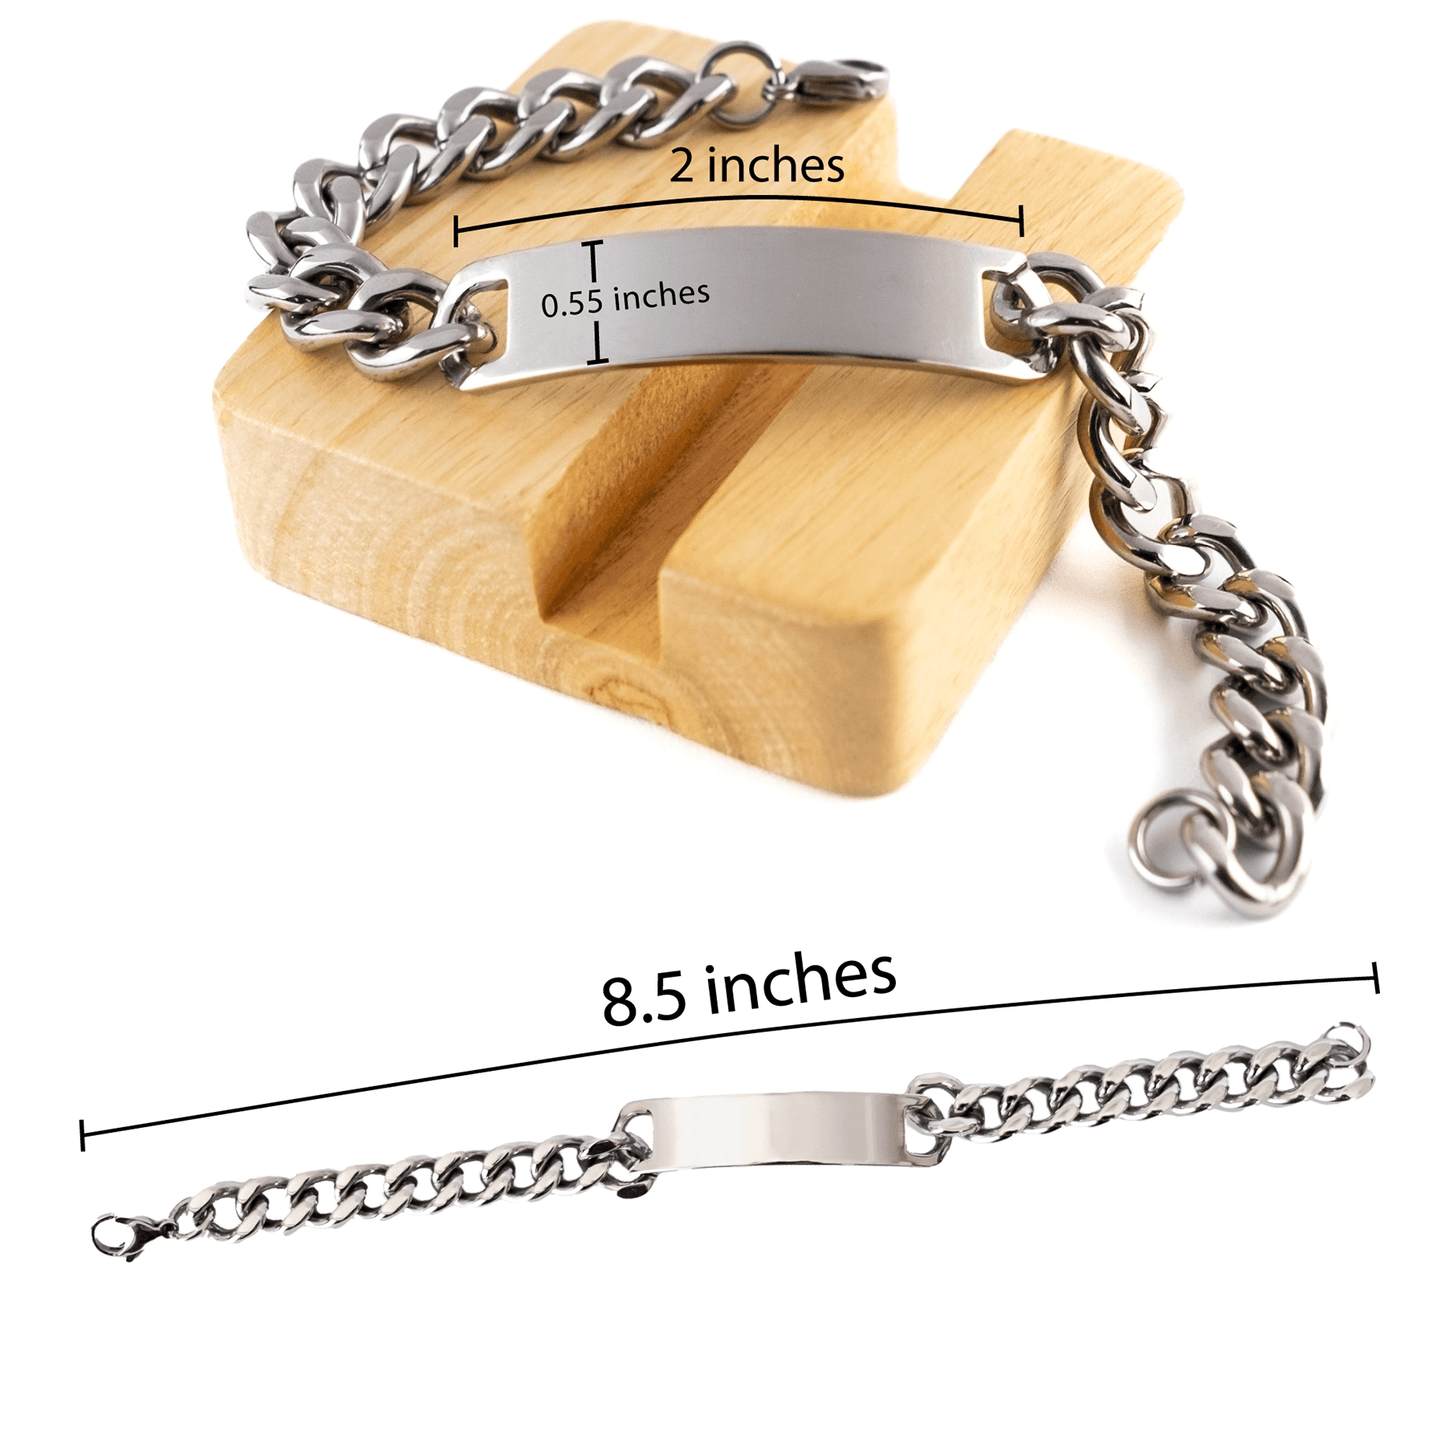 Waitress Cuban Chain Link Engraved Bracelet - Thanks for being who you are - Birthday Christmas Jewelry Gifts Coworkers Colleague Boss - Mallard Moon Gift Shop